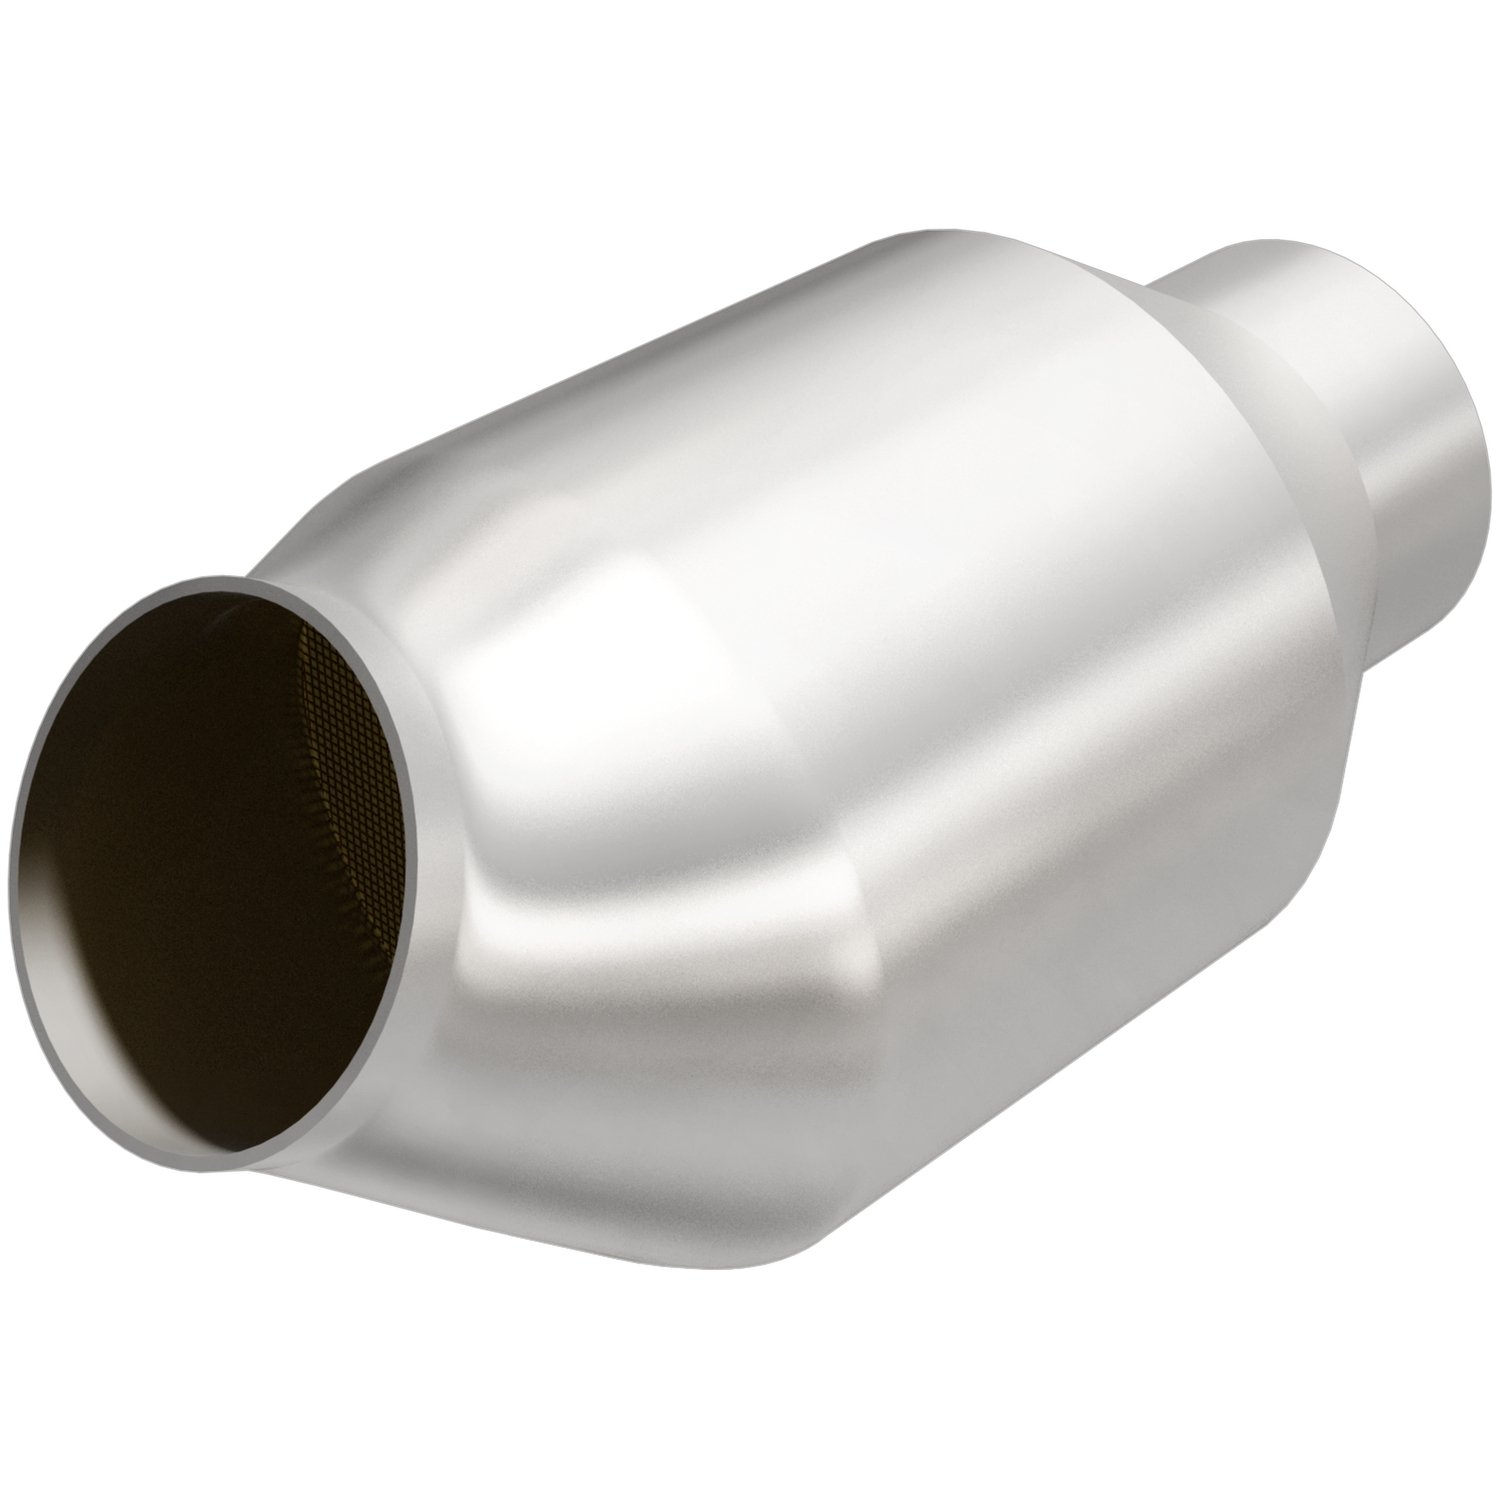 Pre OBD-II Spun Catalytic Converter Inlet/Outlet: 3" (Angled Inlet)